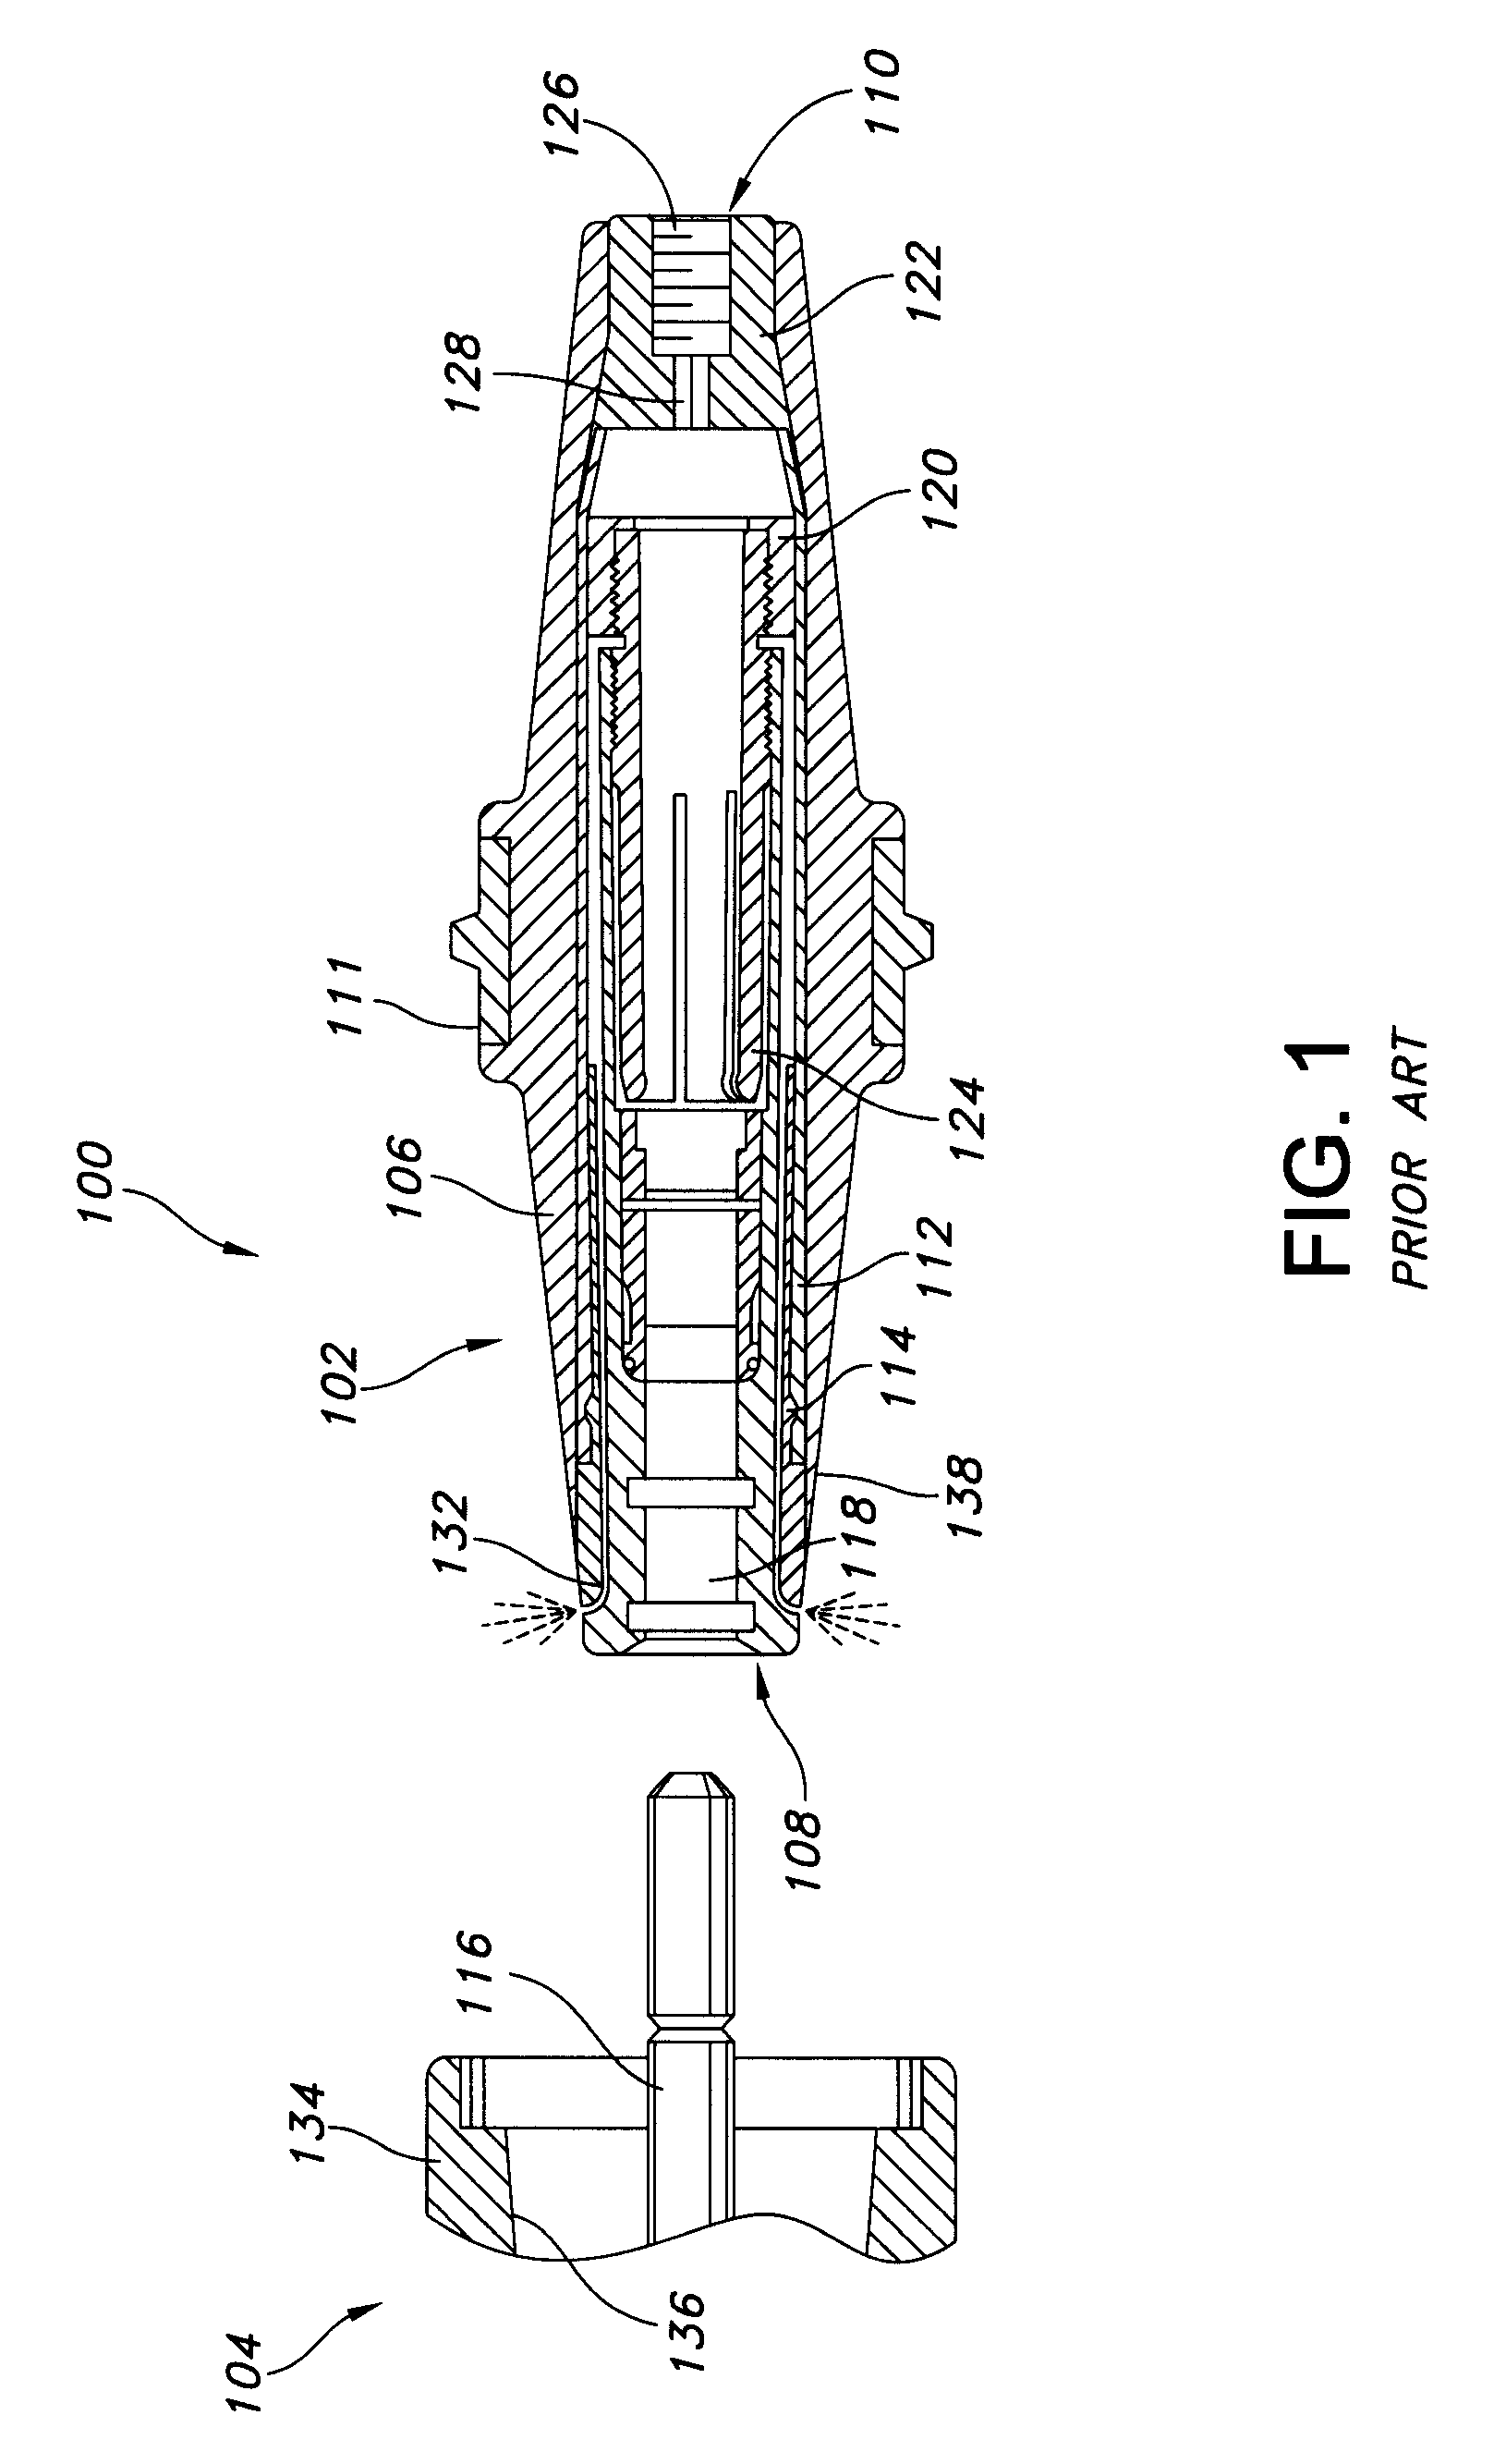 Thermoplastic interface and shield assembly for separable insulated connector system